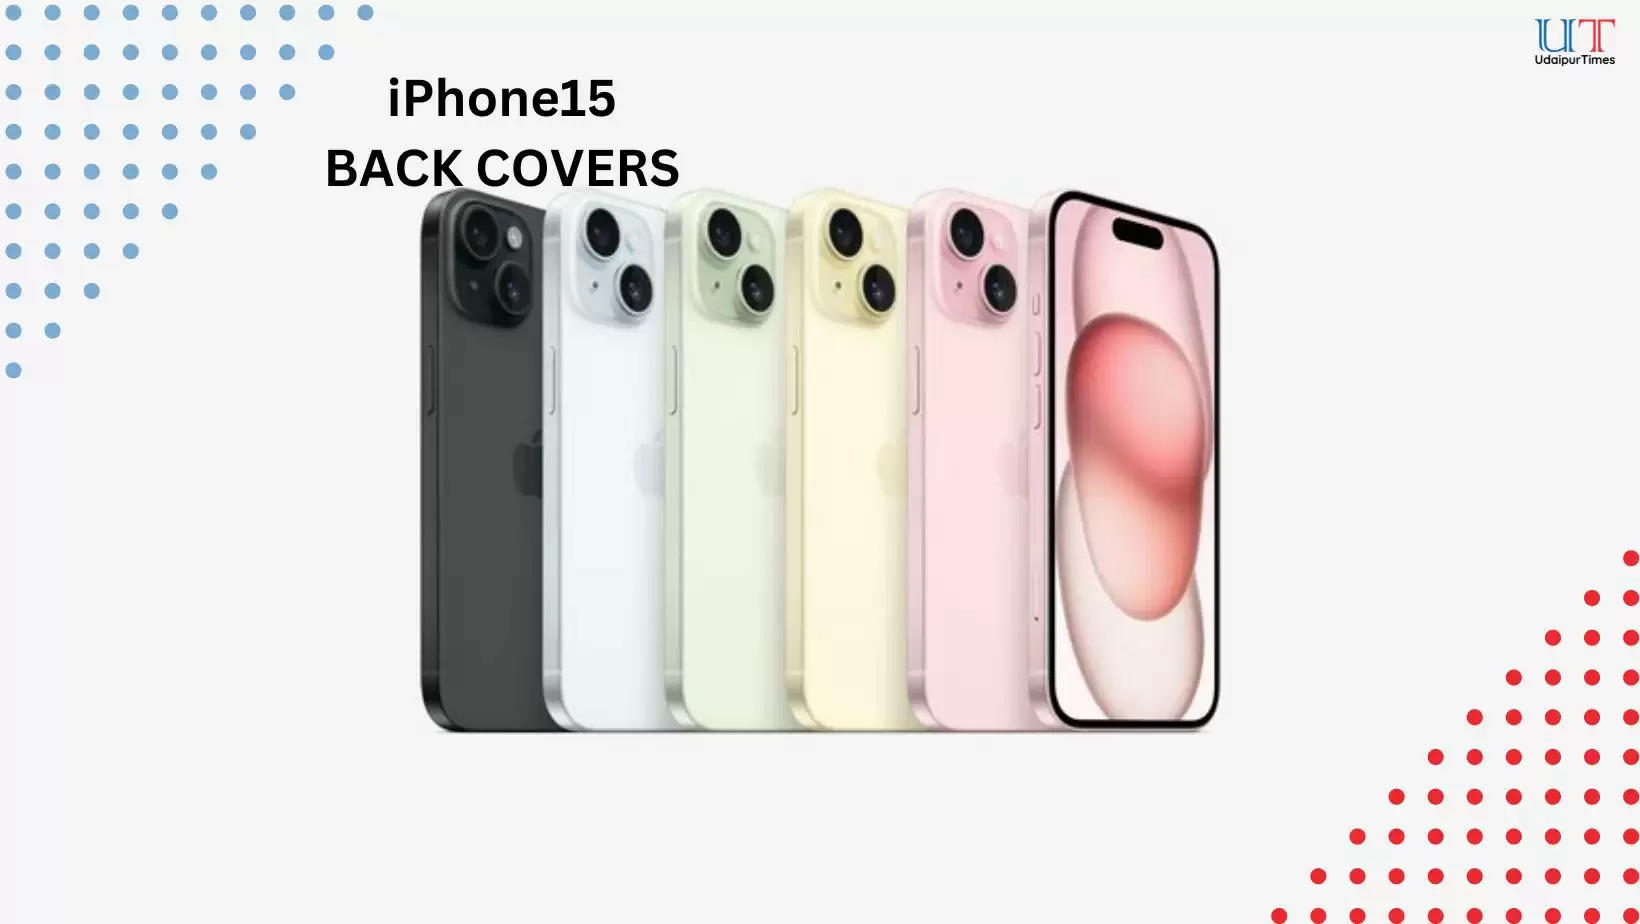 iPhone15 Back Covers Buy iPhone 15 Back Covers, Where to buy iPhone15 BackCovers